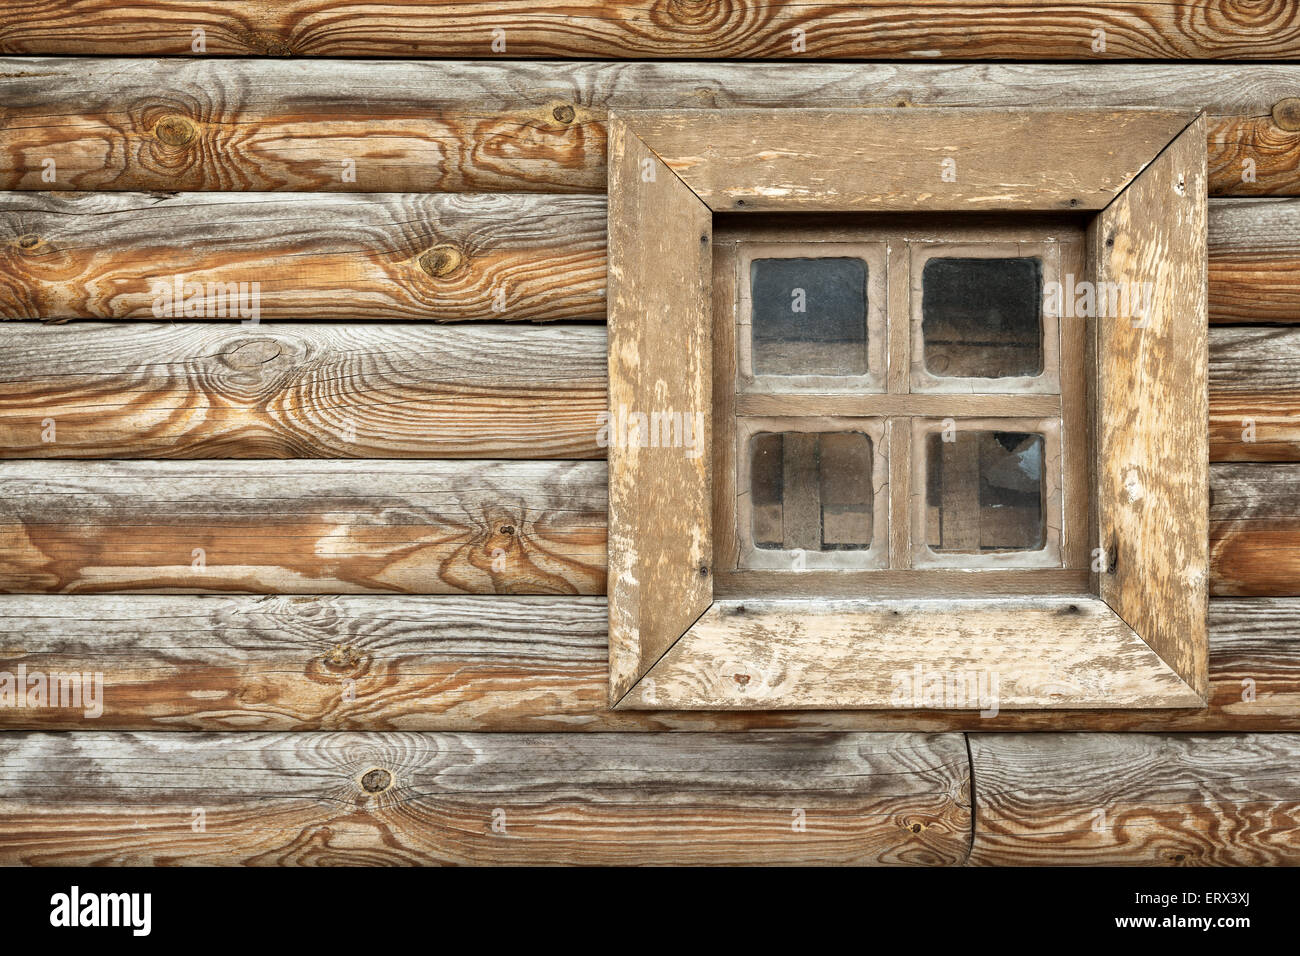 Old window of the old wooden house on the background of wooden walls Stock Photo